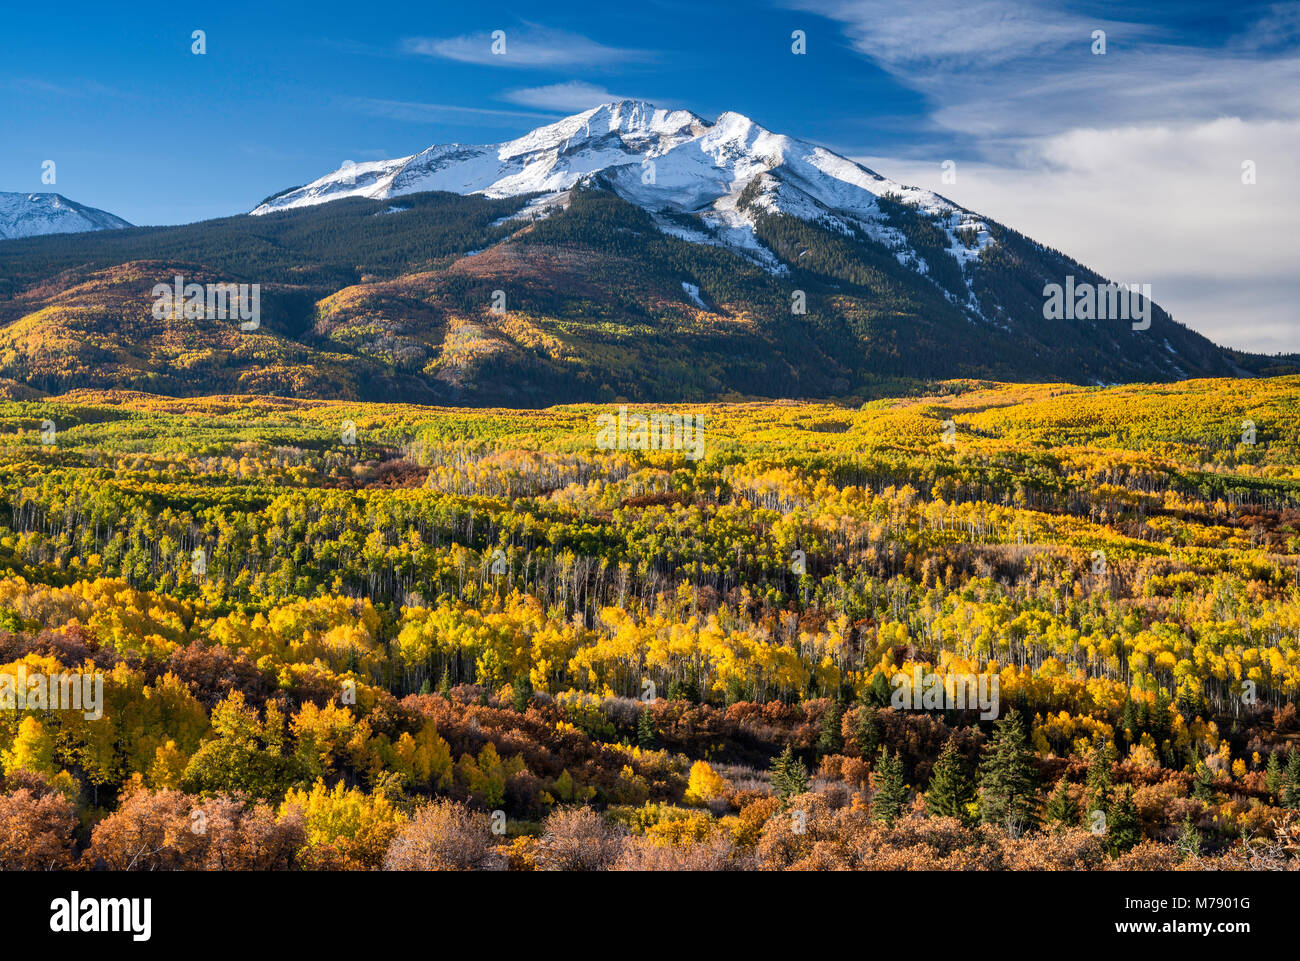 West Beckwith Mountain, aspens in fall foliage, seen from West Elk Loop Scenic Byway, Gunnison National Forest, West Elk Mountains, Colorado, USA Stock Photo